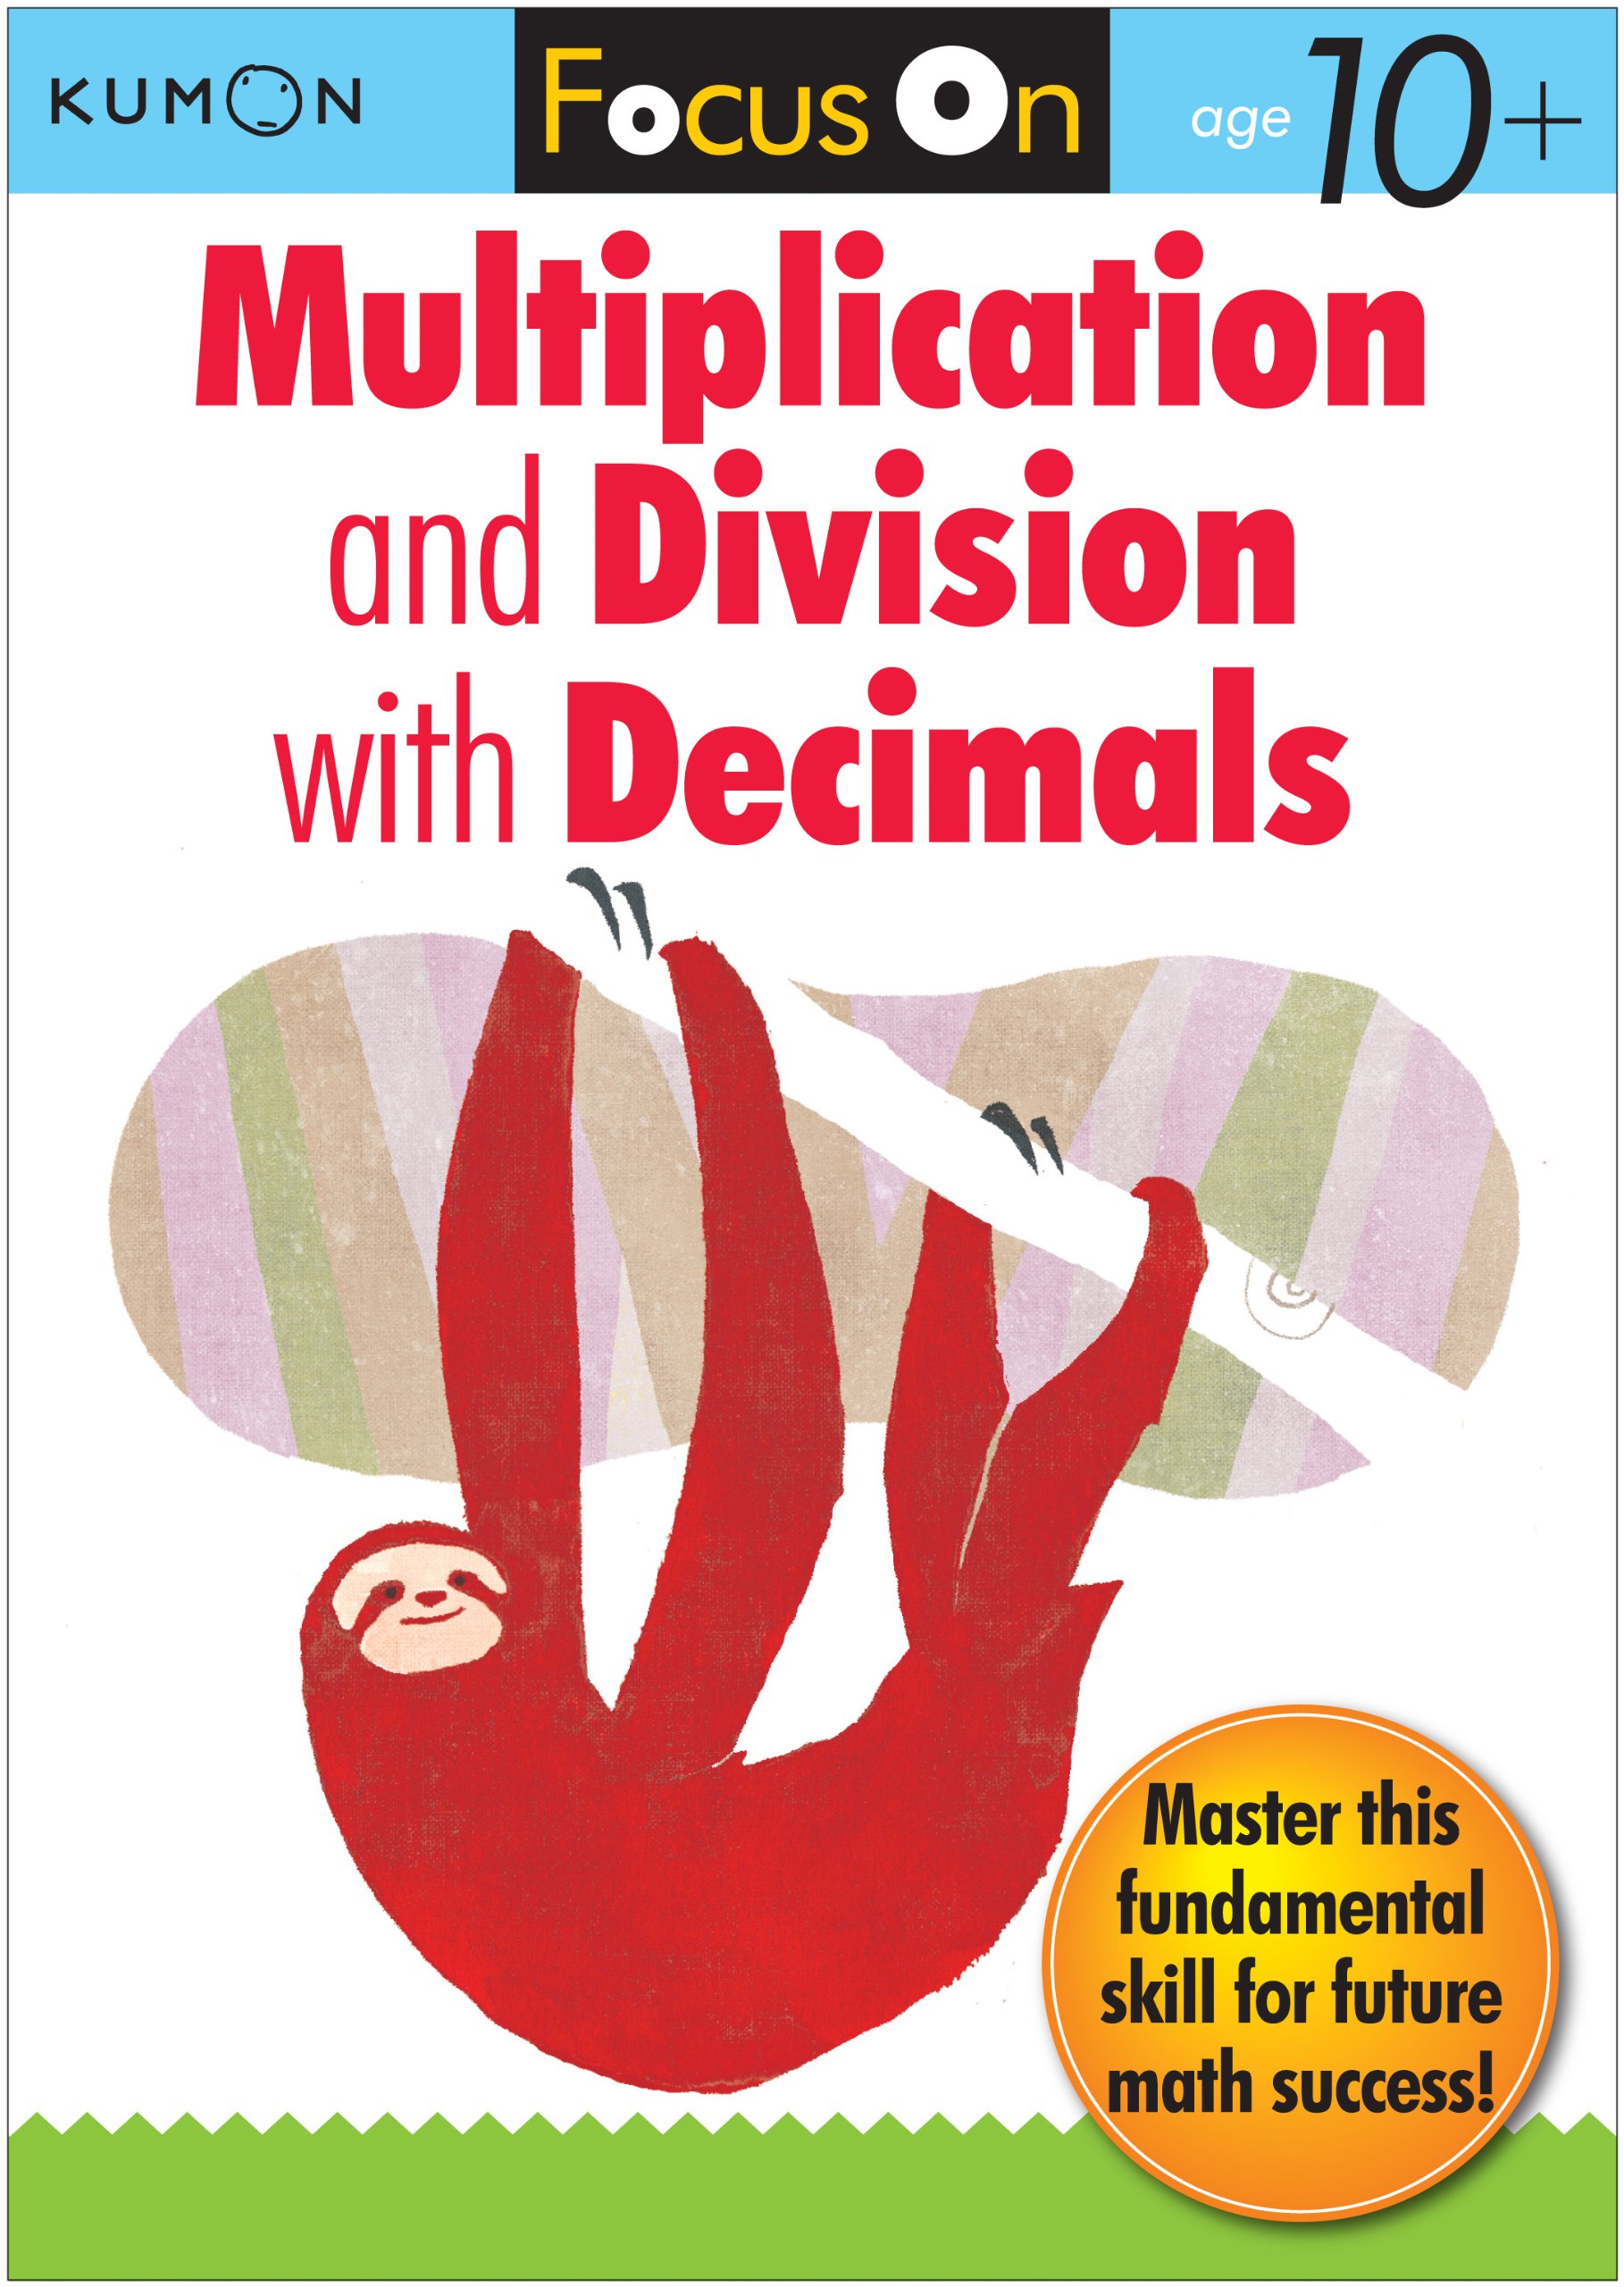 Kumon Focus On: Multiplication and Division with Decimals